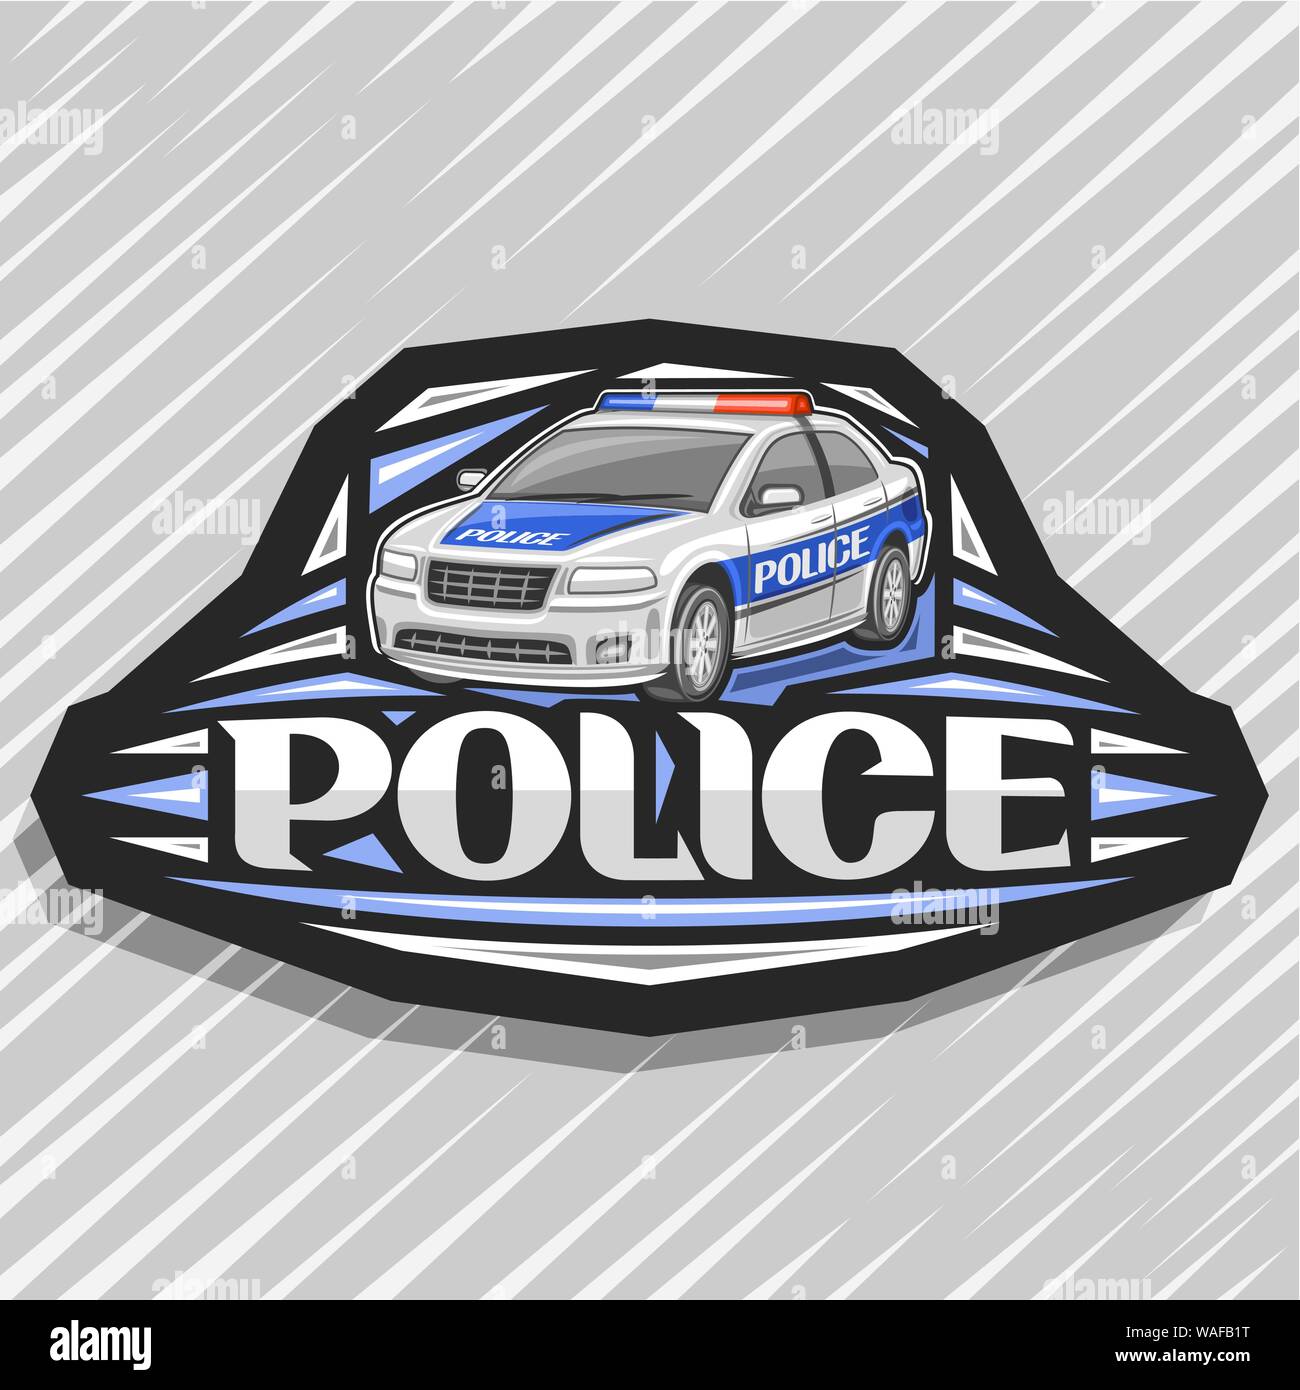 Vector logo for Police Car, black decorative sign with illustration of modern sedan of municipal road department, original lettering for word police, Stock Vector